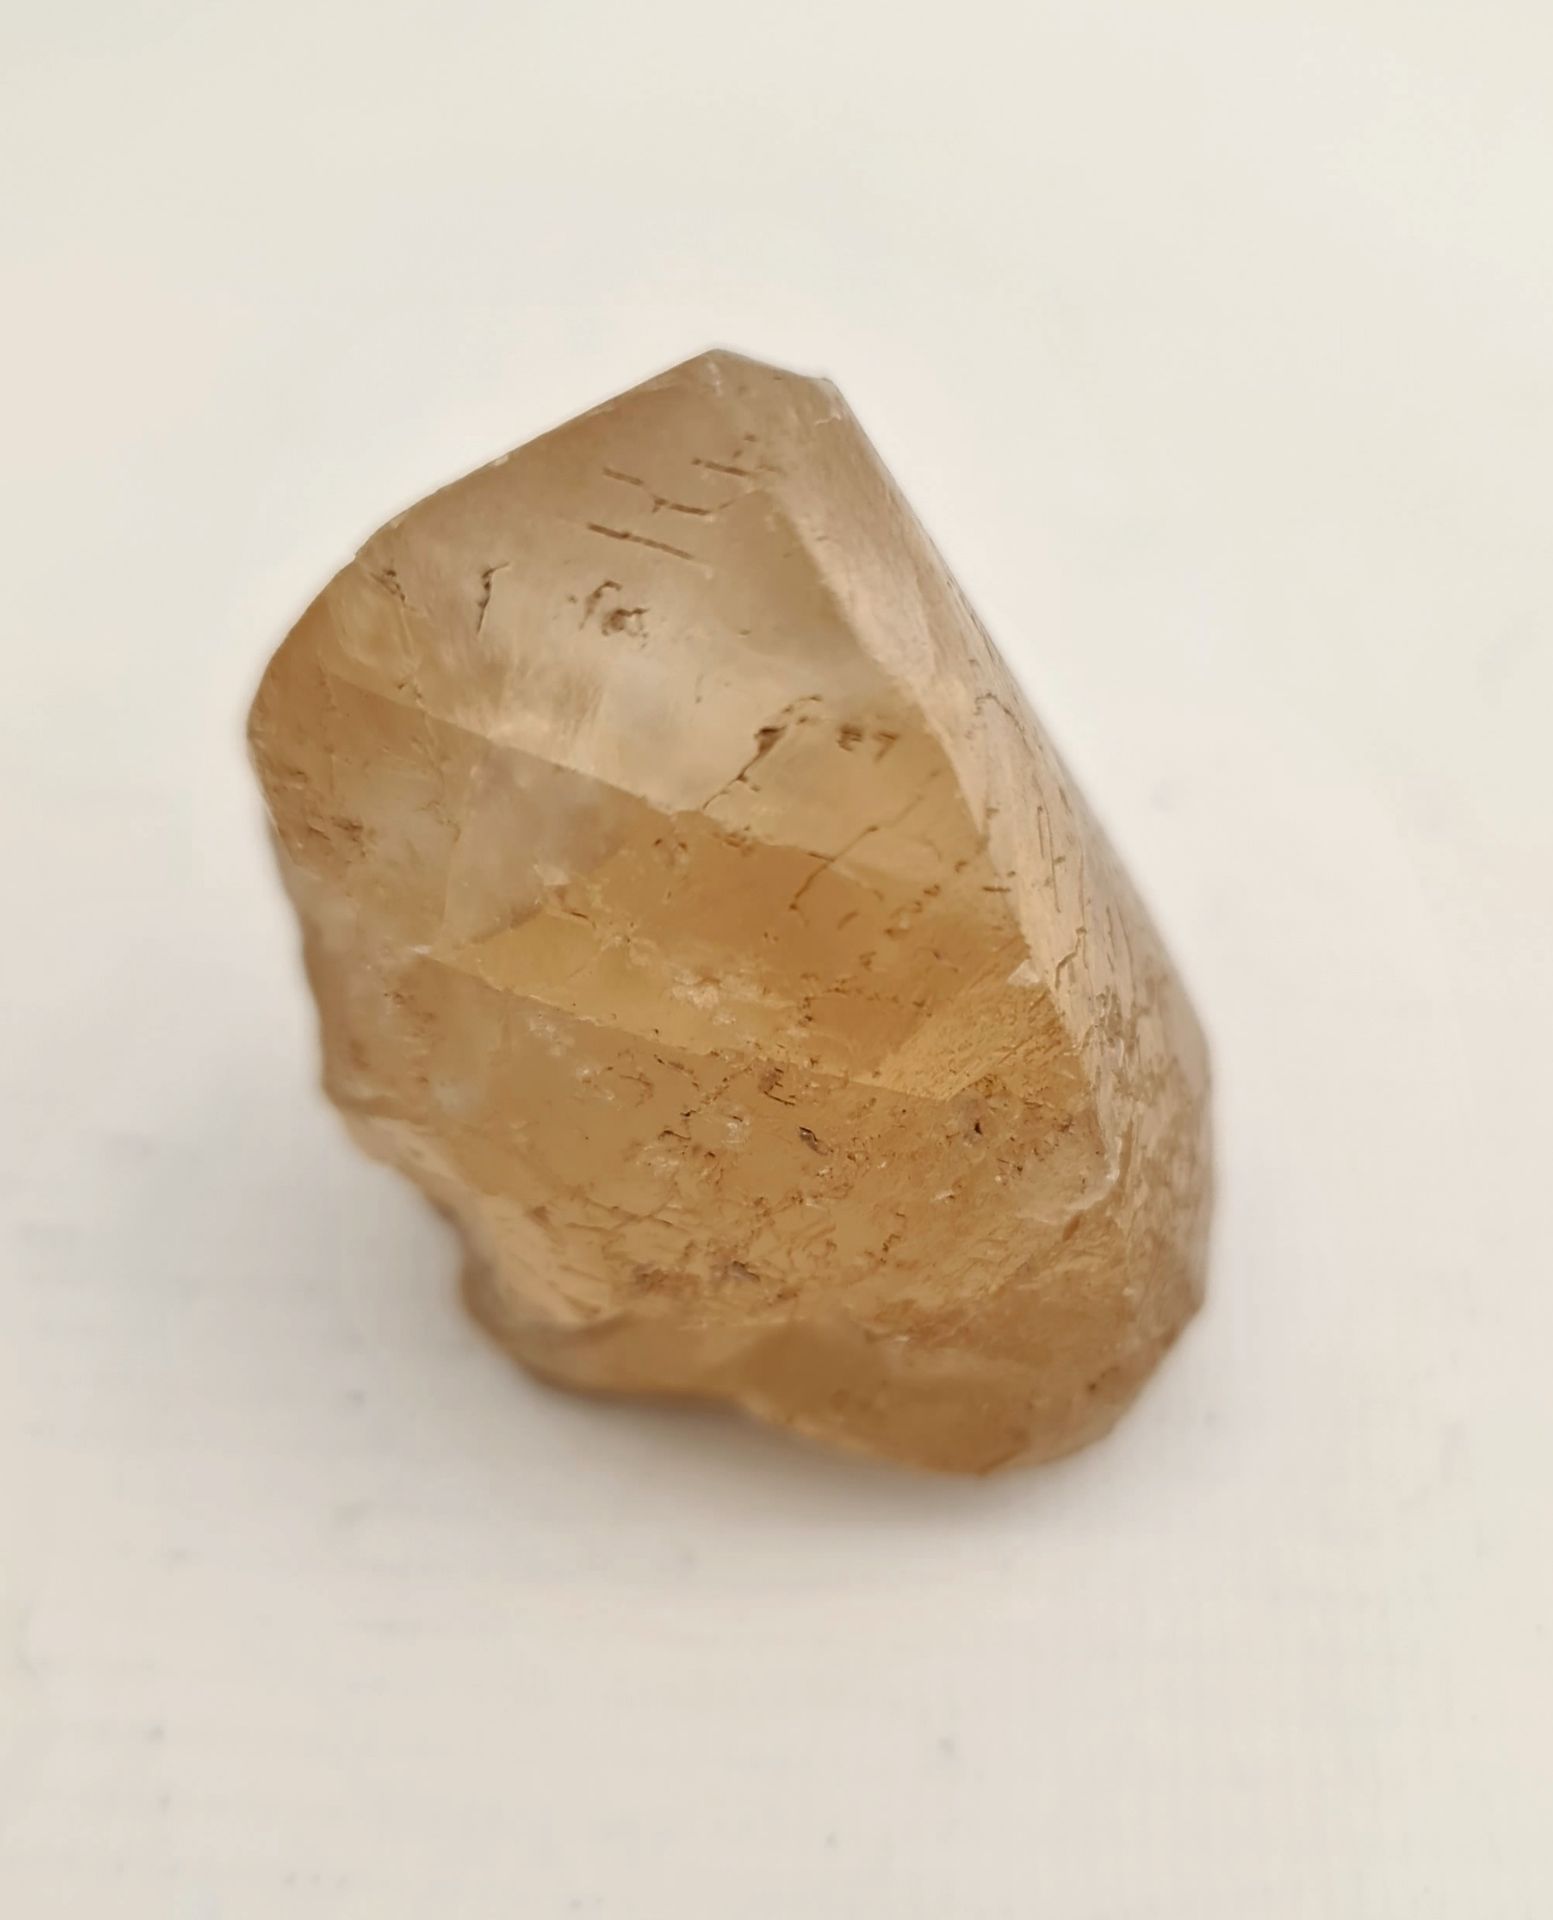 Collectable Minerals Single Dog Tooth Calcite Crystal Weight 163g. Measures 3 inches tall